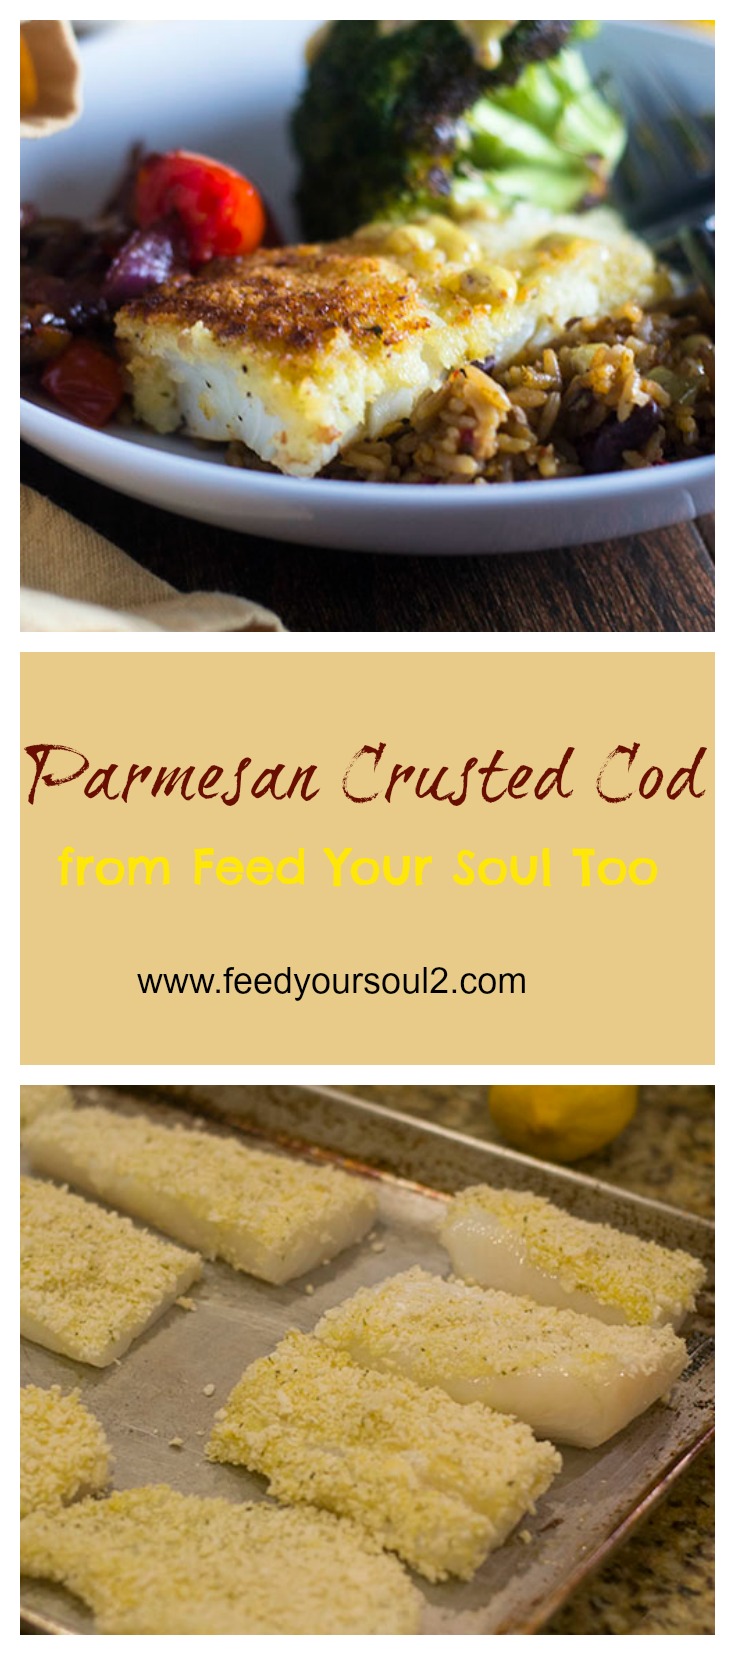 Parmesan Crusted Cod #seafood #dinner #parmesancrusted | feedyoursoul2.com